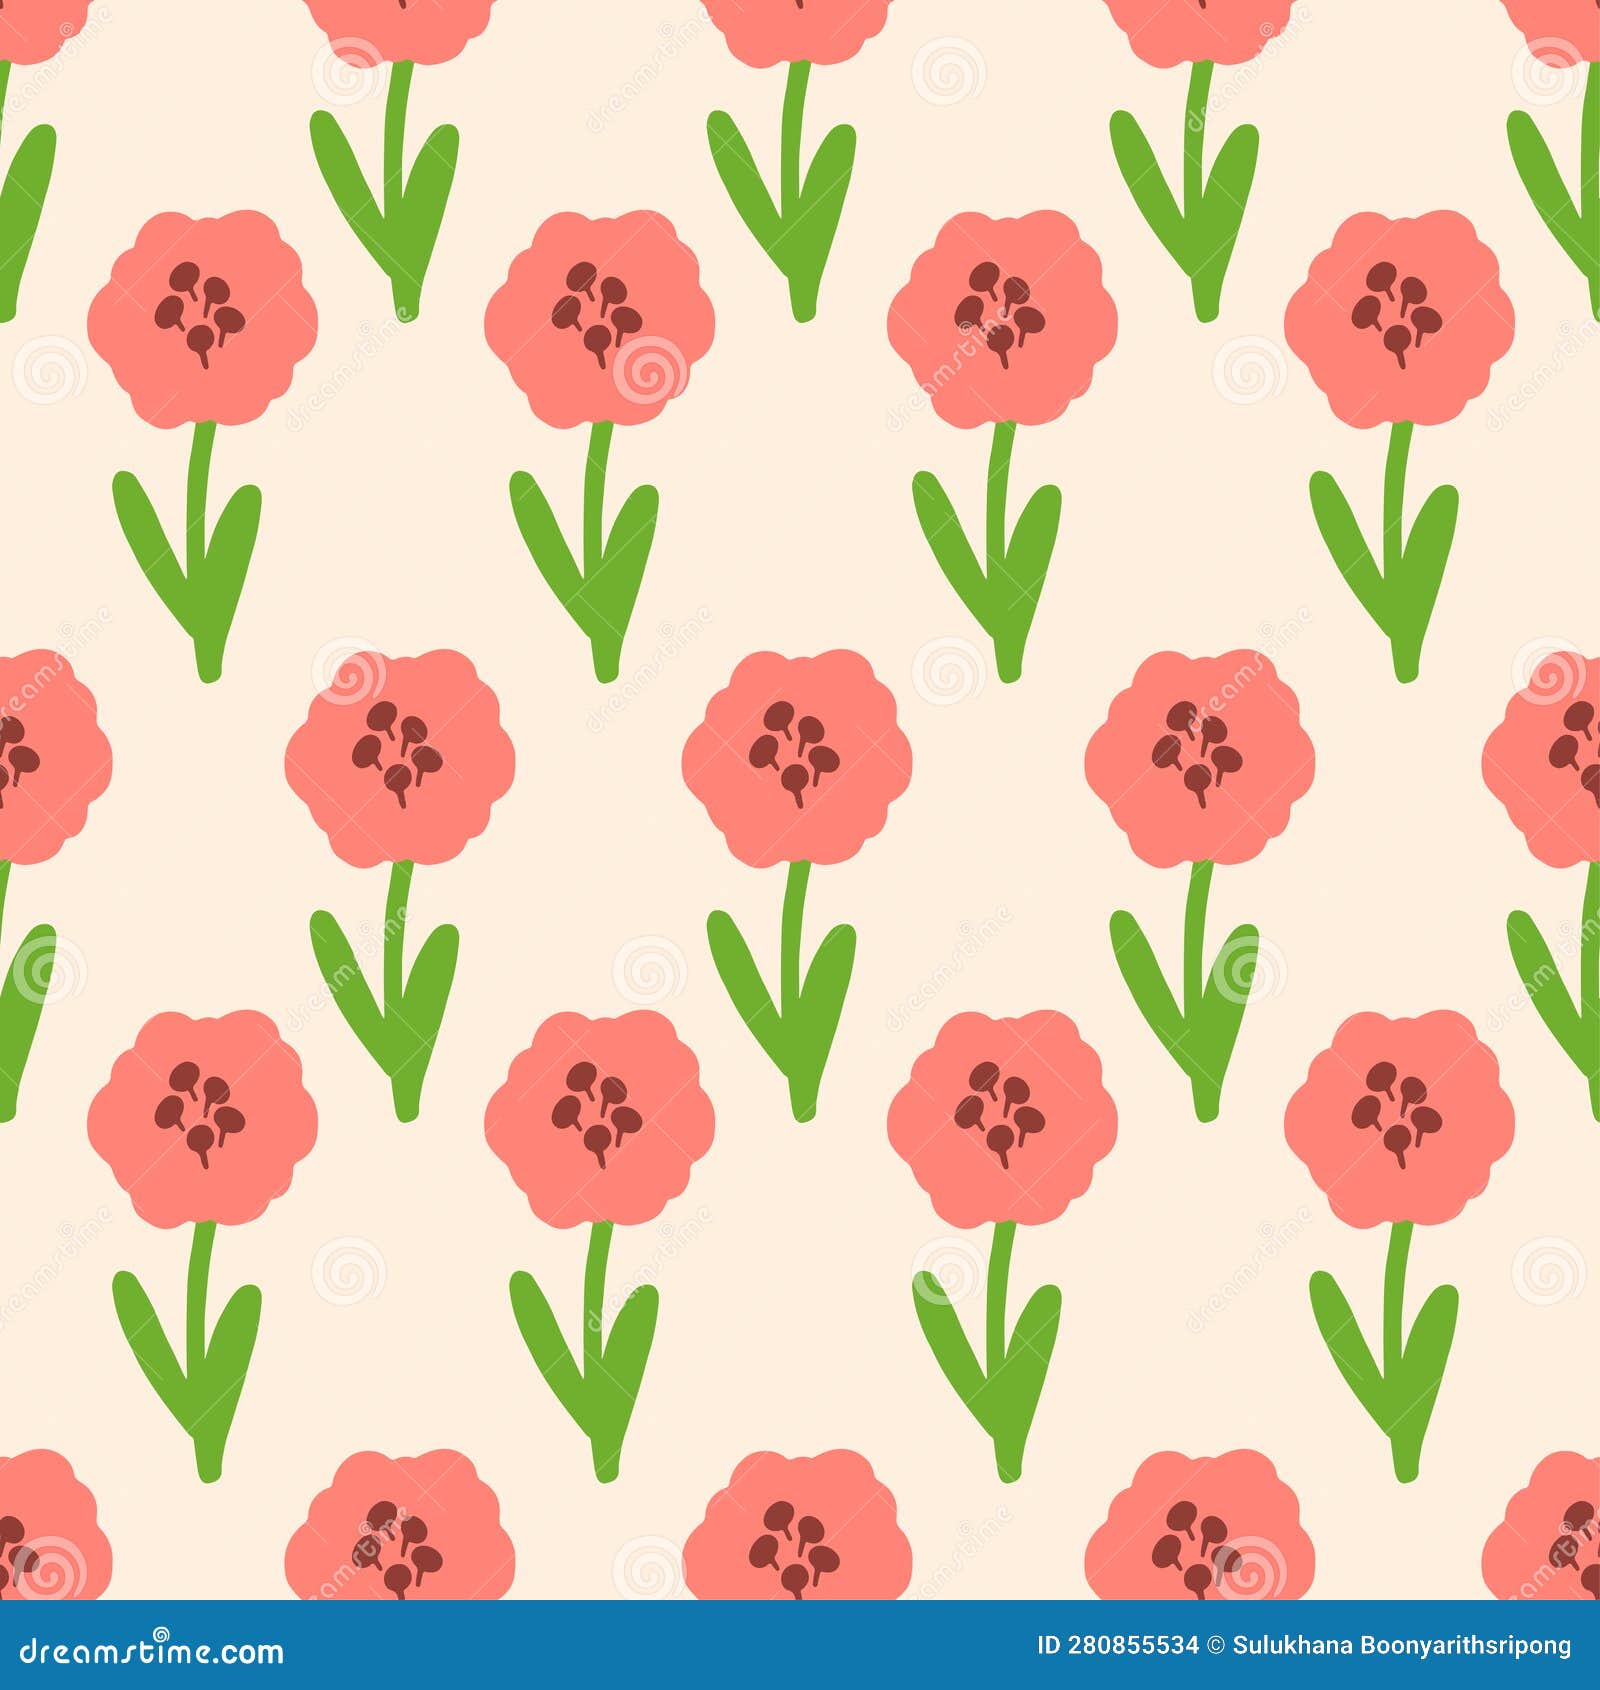 Doodle Flowers Seamless Pattern Bg for Media, Gift, Card, Print and More.  Vector Illustration Stock Vector - Illustration of vector, paper: 280855534